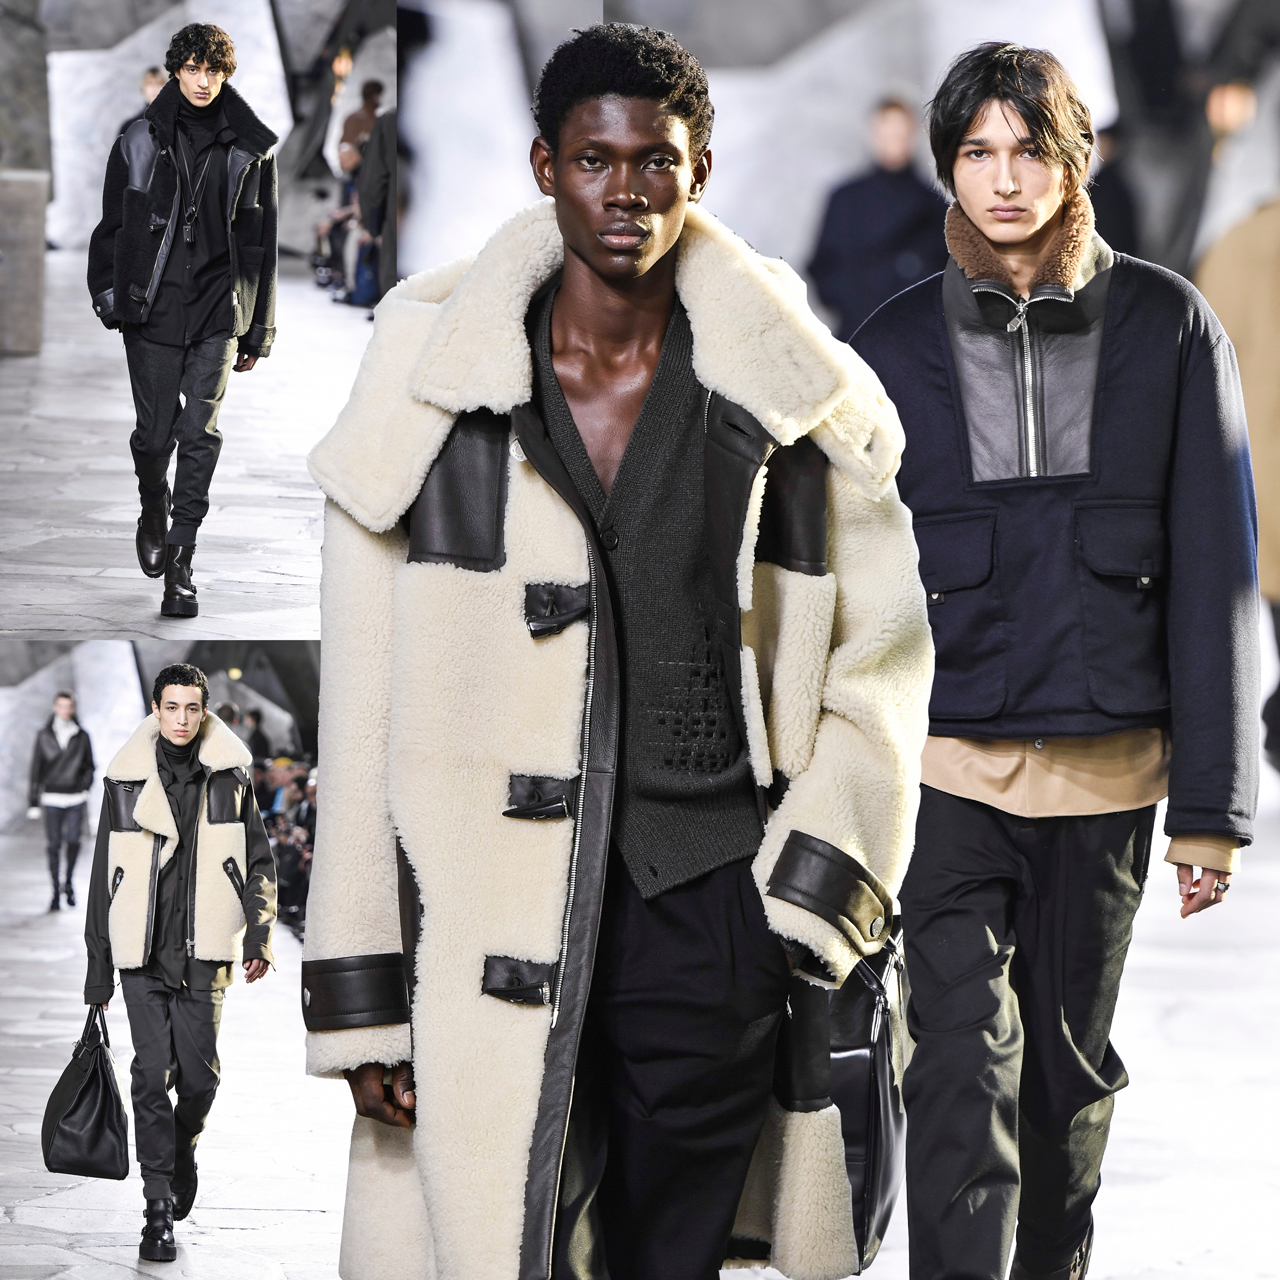 Herm&egrave;s Fall Winter 2023 menswear collection